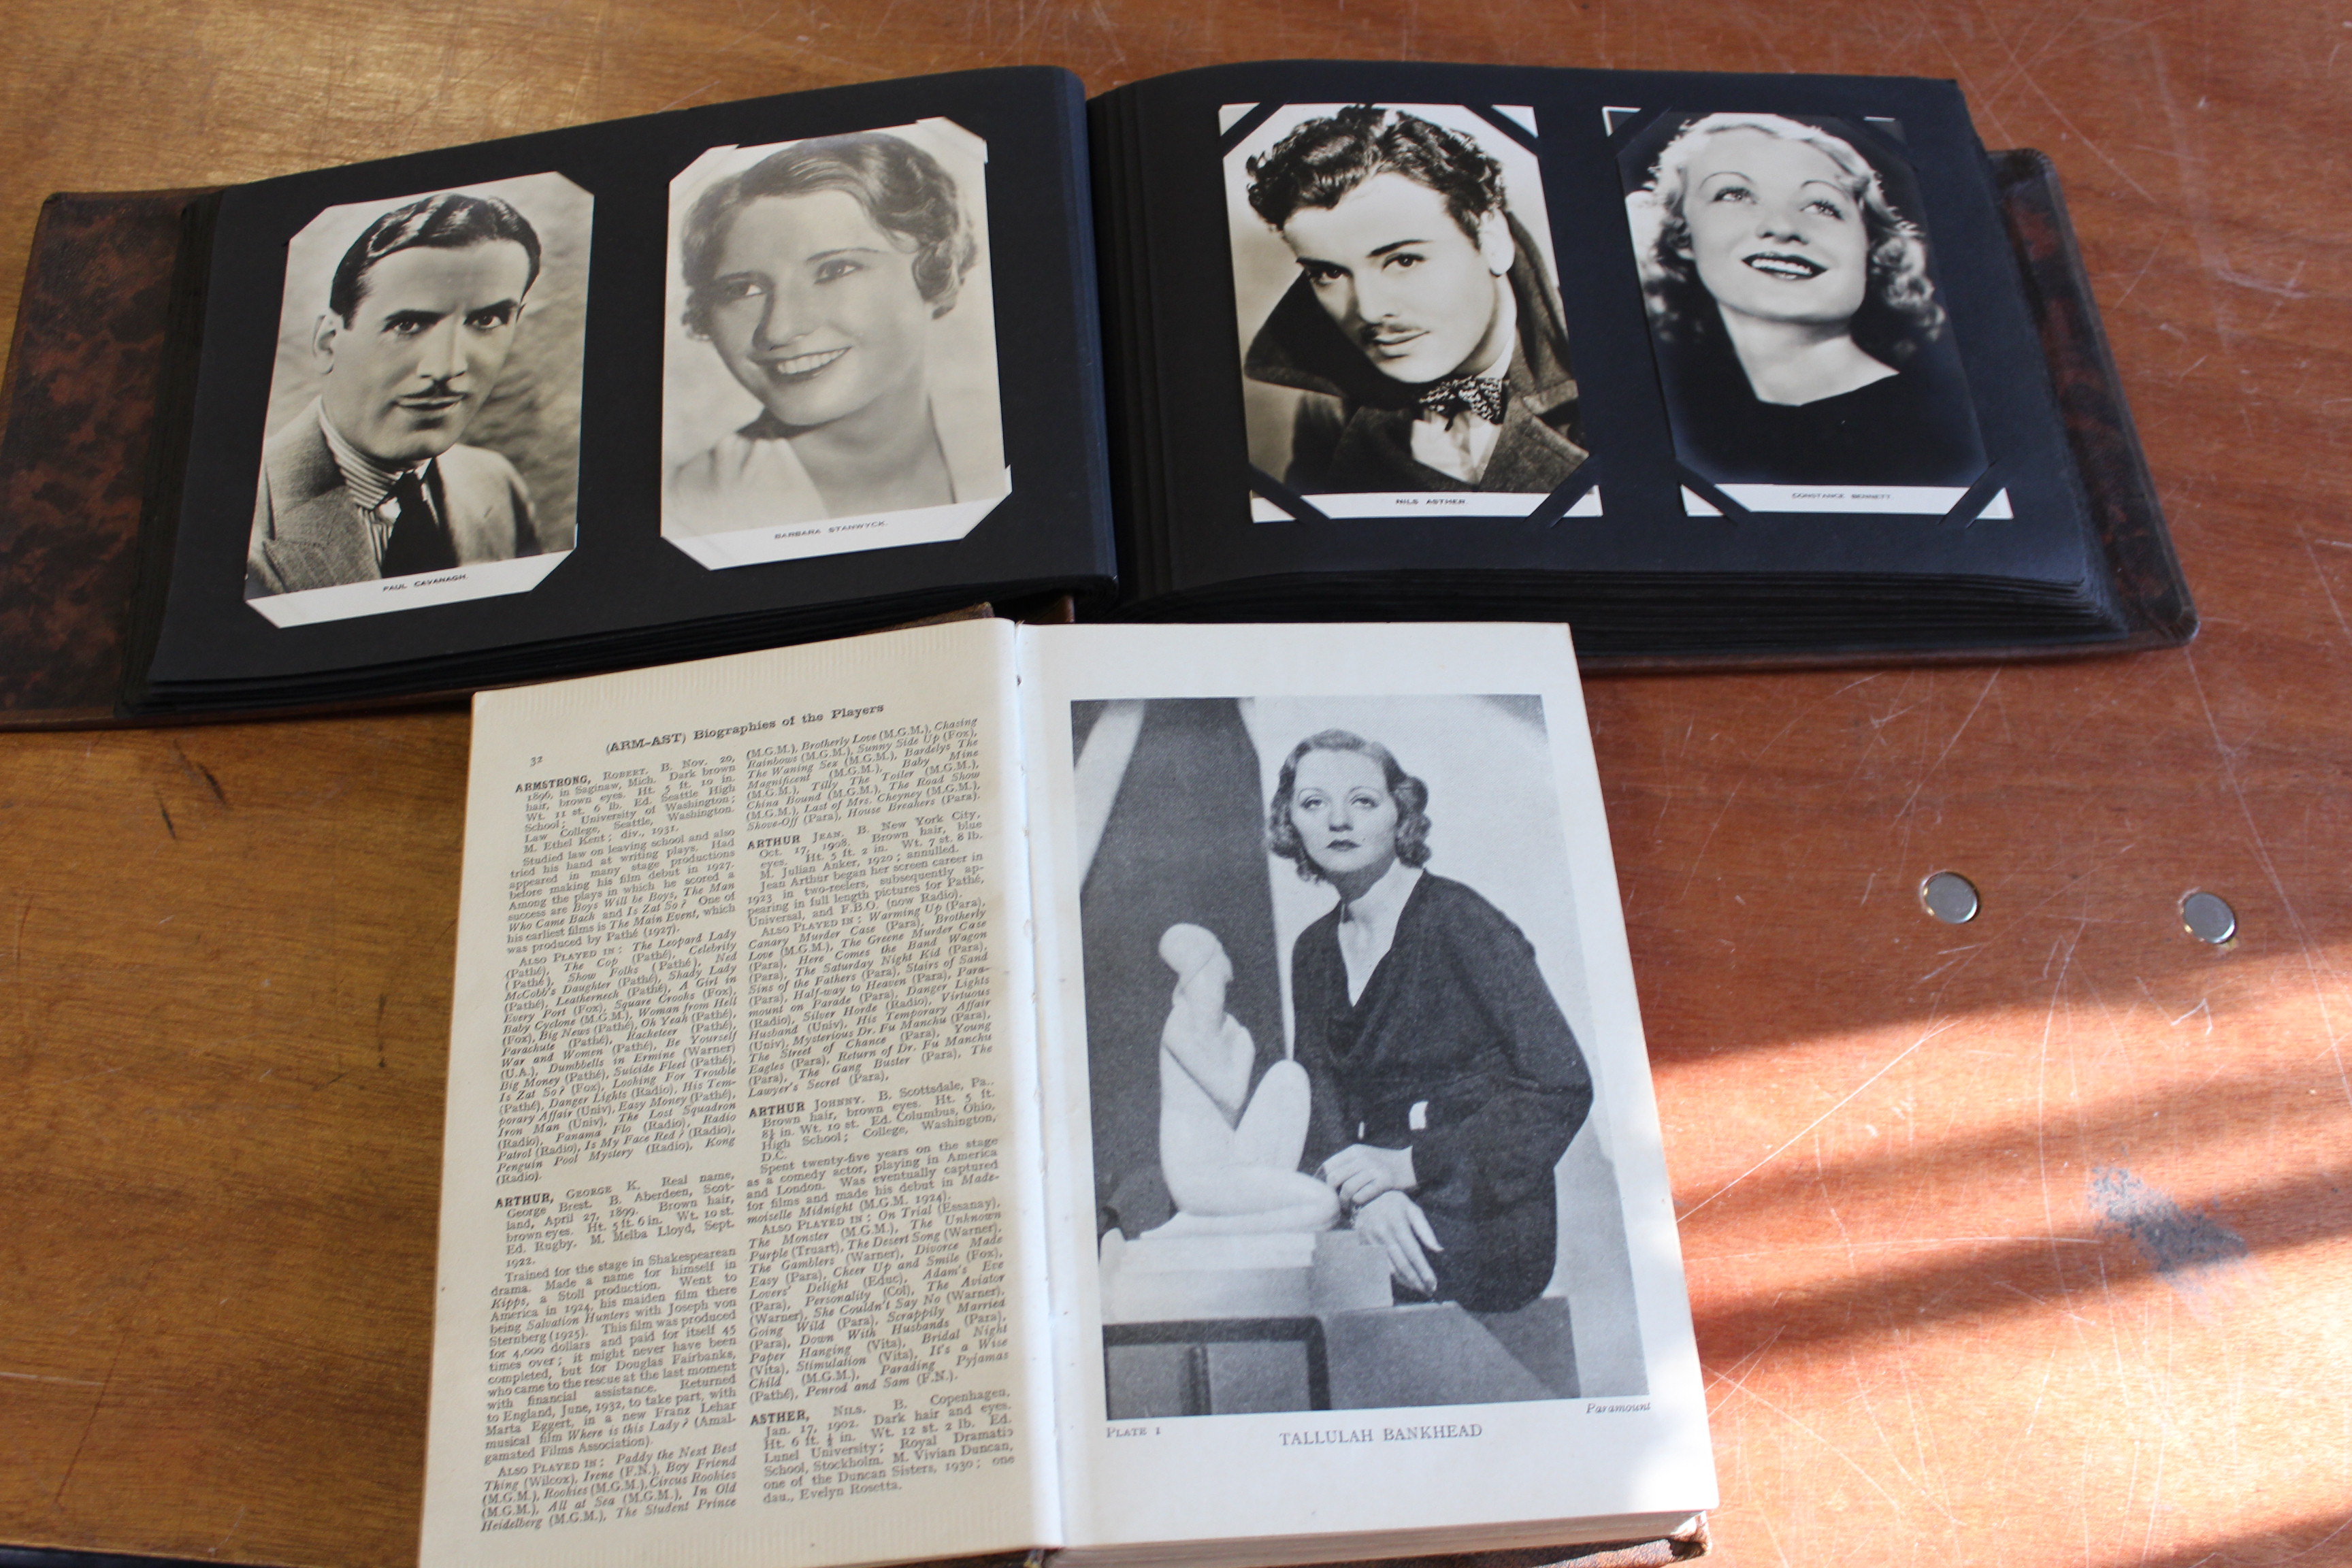 Cinema Stars album together with The World Film Encyclopaedia, Laurel & Hardy noted (approx 177